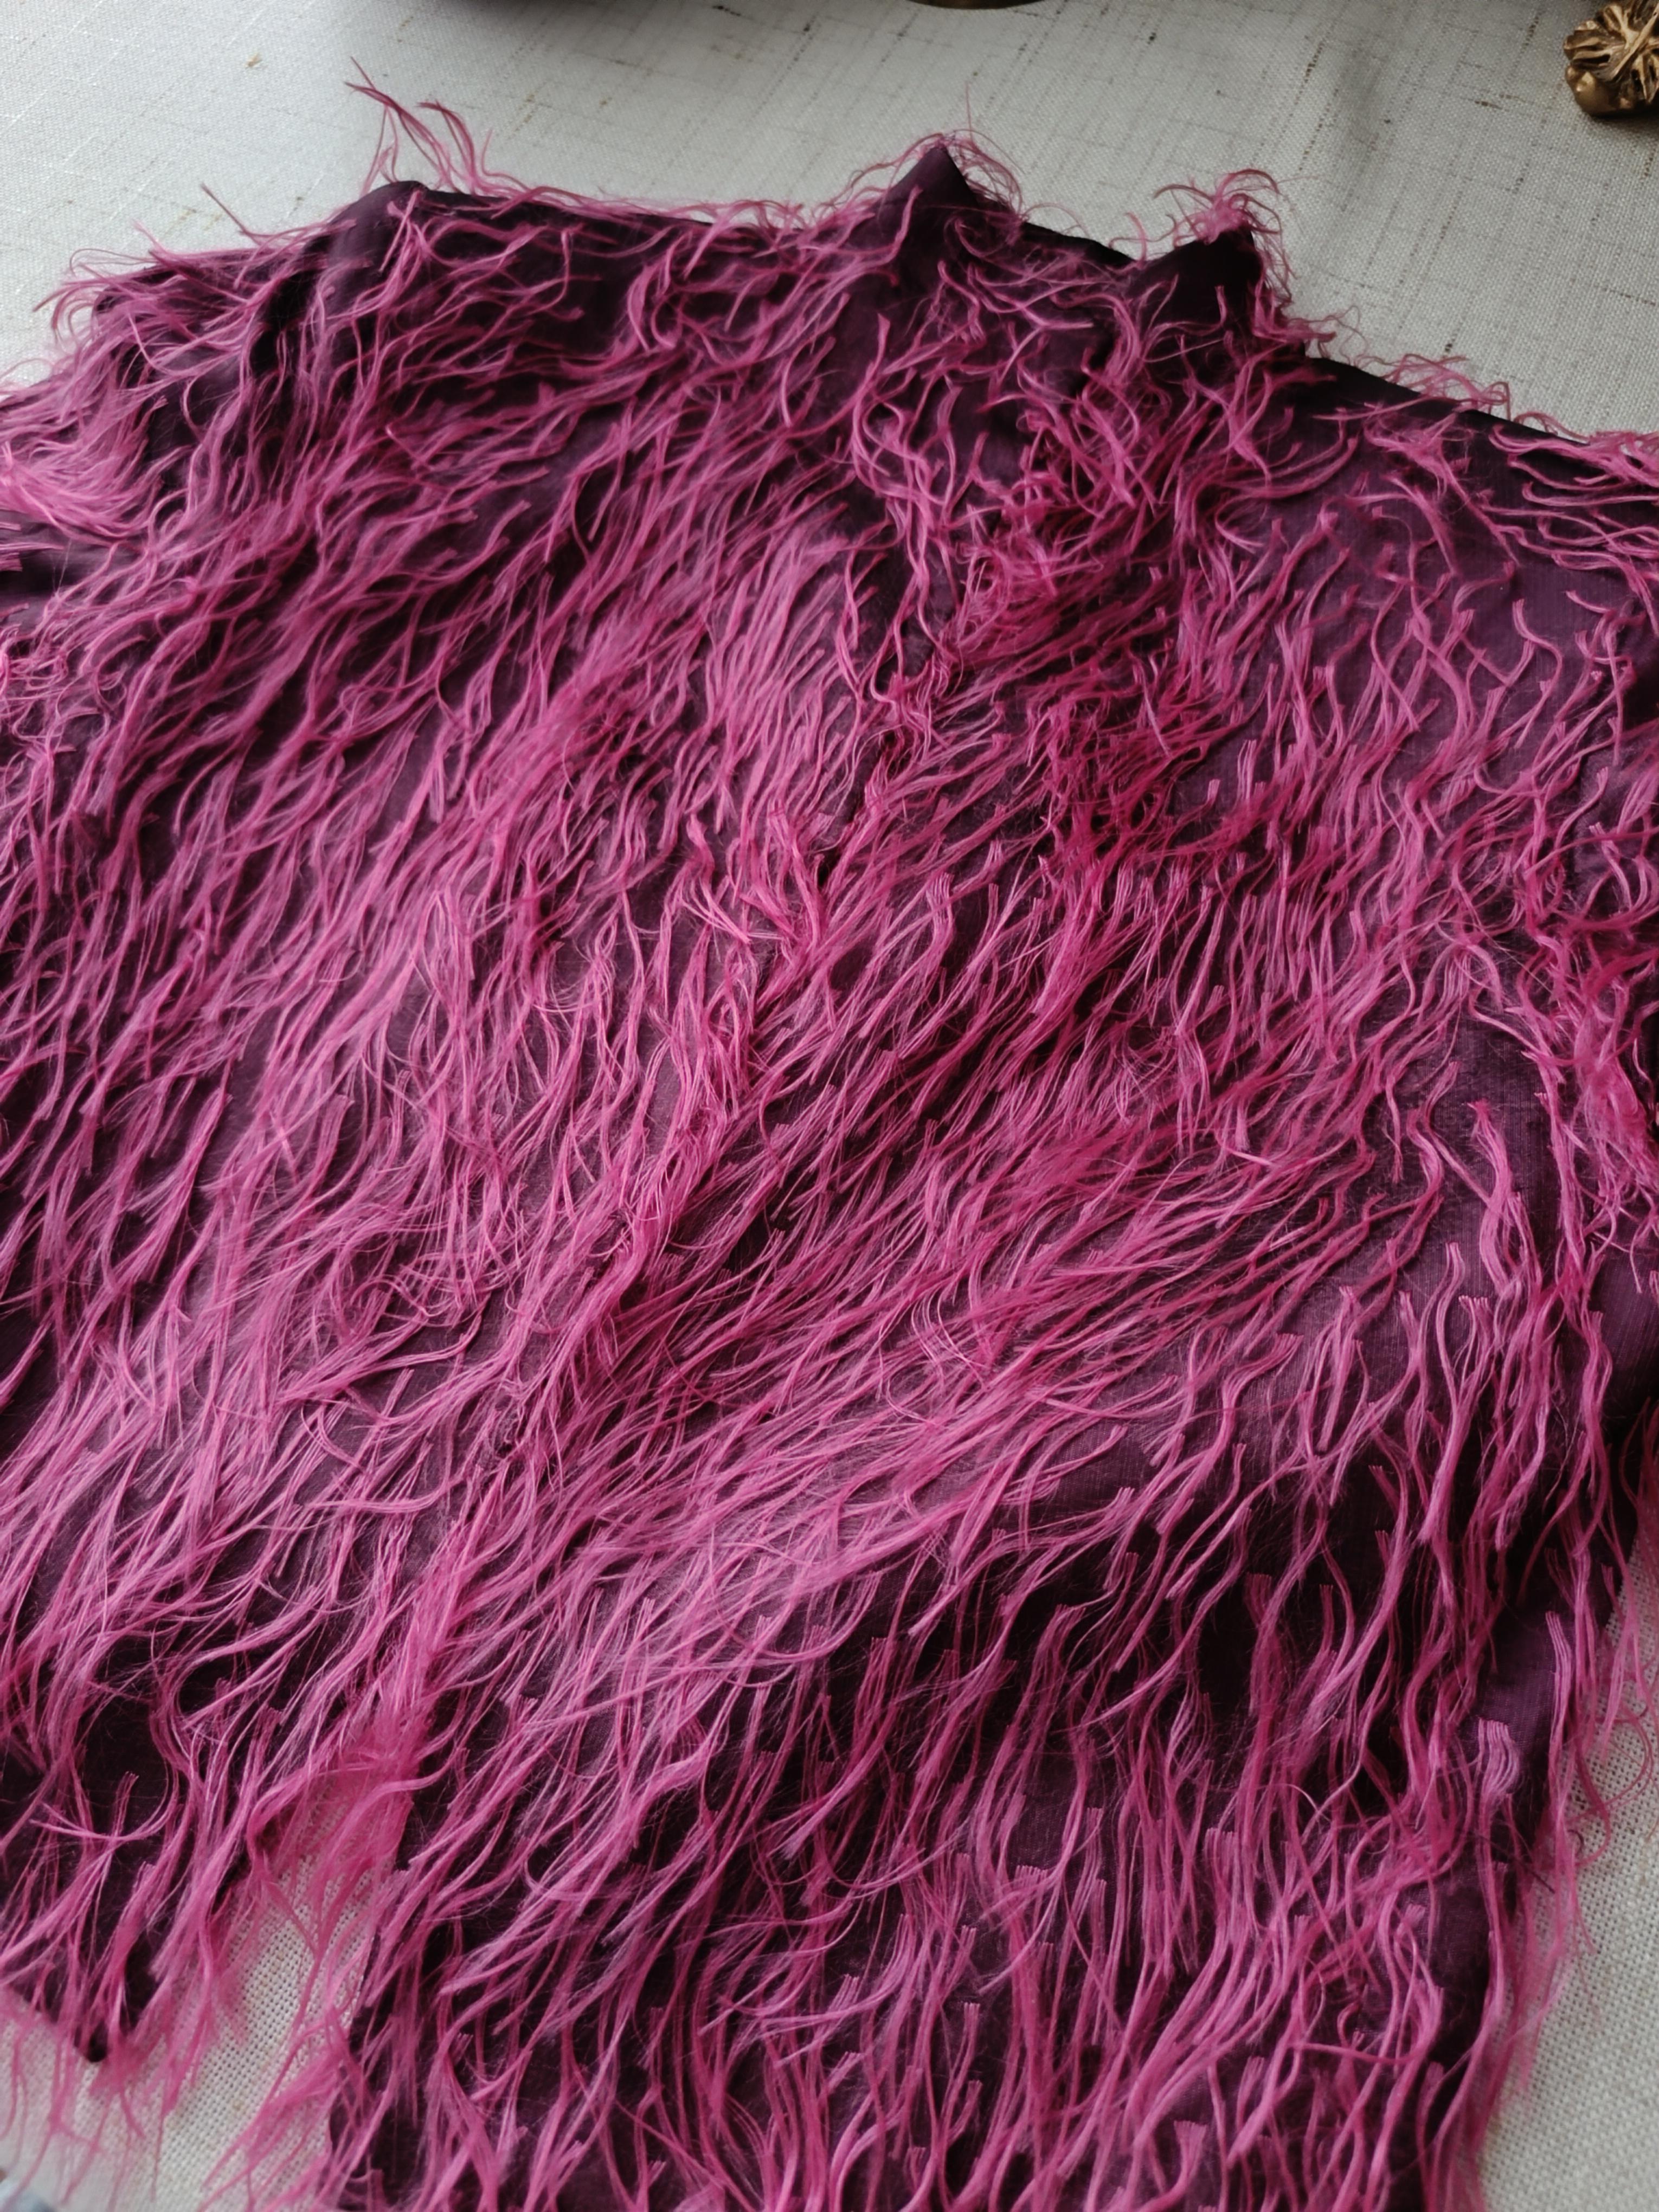 Yves Saint Laurent YSL 2000 Fuchsia Shaggy Faux Fur Cropped Jacket

Collection: YSL 2000 variation
Country of production: France
Dimensions
Marked Size: 40 Fr (L)
I present to you a rare furry faux fur jacket from Yves Saint Laurent with a high